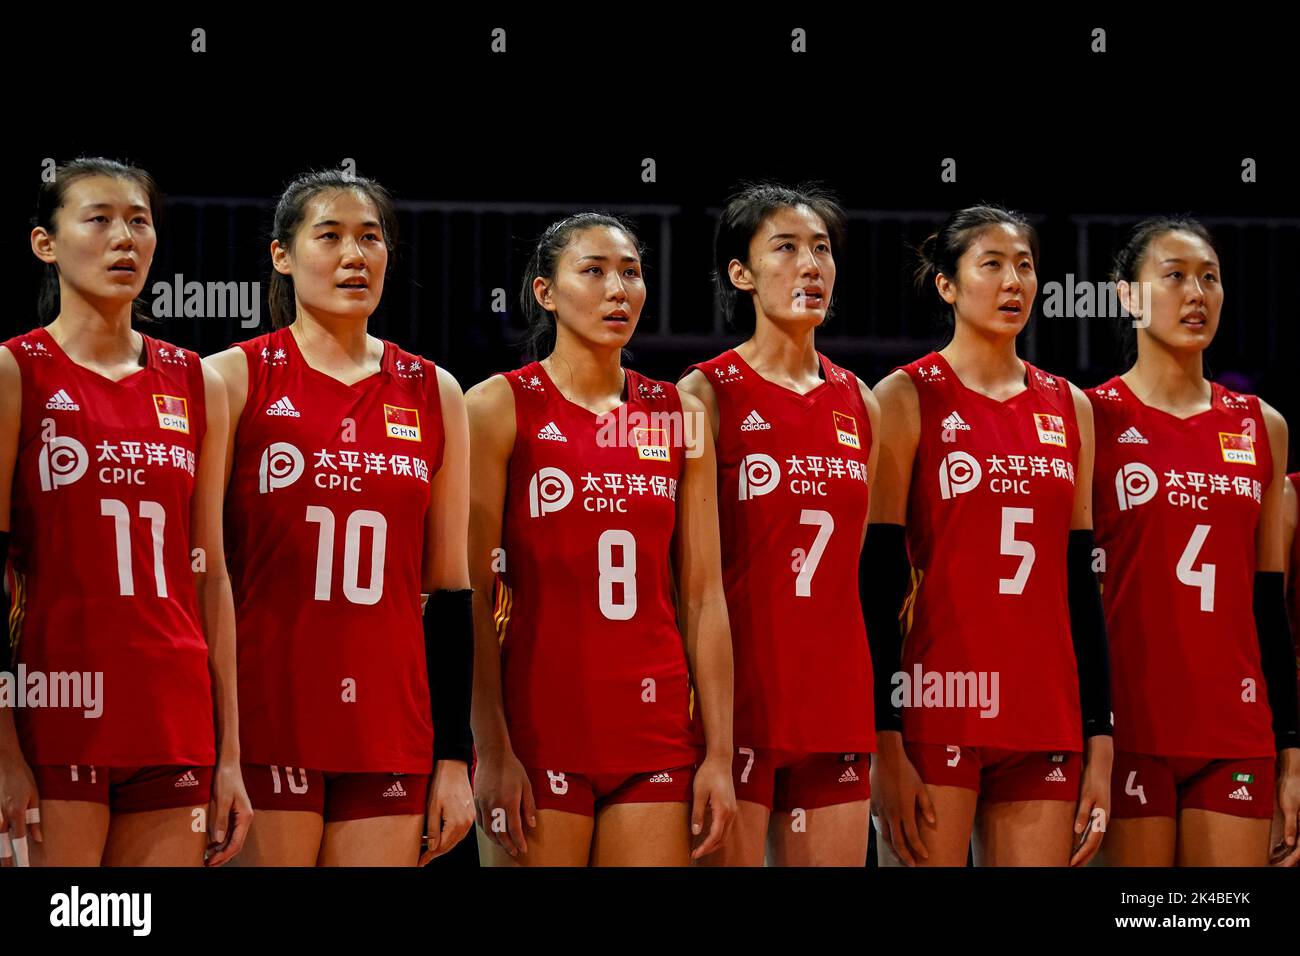 ARNHEM, NETHERLANDS - SEPTEMBER 25: Yizhu Wang of China, Yunlu Wang of China, Ye Jin of China, Yi Gao of China, Yuanyuan Wang of China and Hanyu Yang of China line up for the national anthem during the Pool D Phase 1 match between China and Argentina on Day 3 of the FIVB Volleyball Womens World Championship 2022 at the Gelredome on September 25, 2022 in Arnhem, Netherlands (Photo by Rene Nijhuis/Orange Pictures) Stock Photo